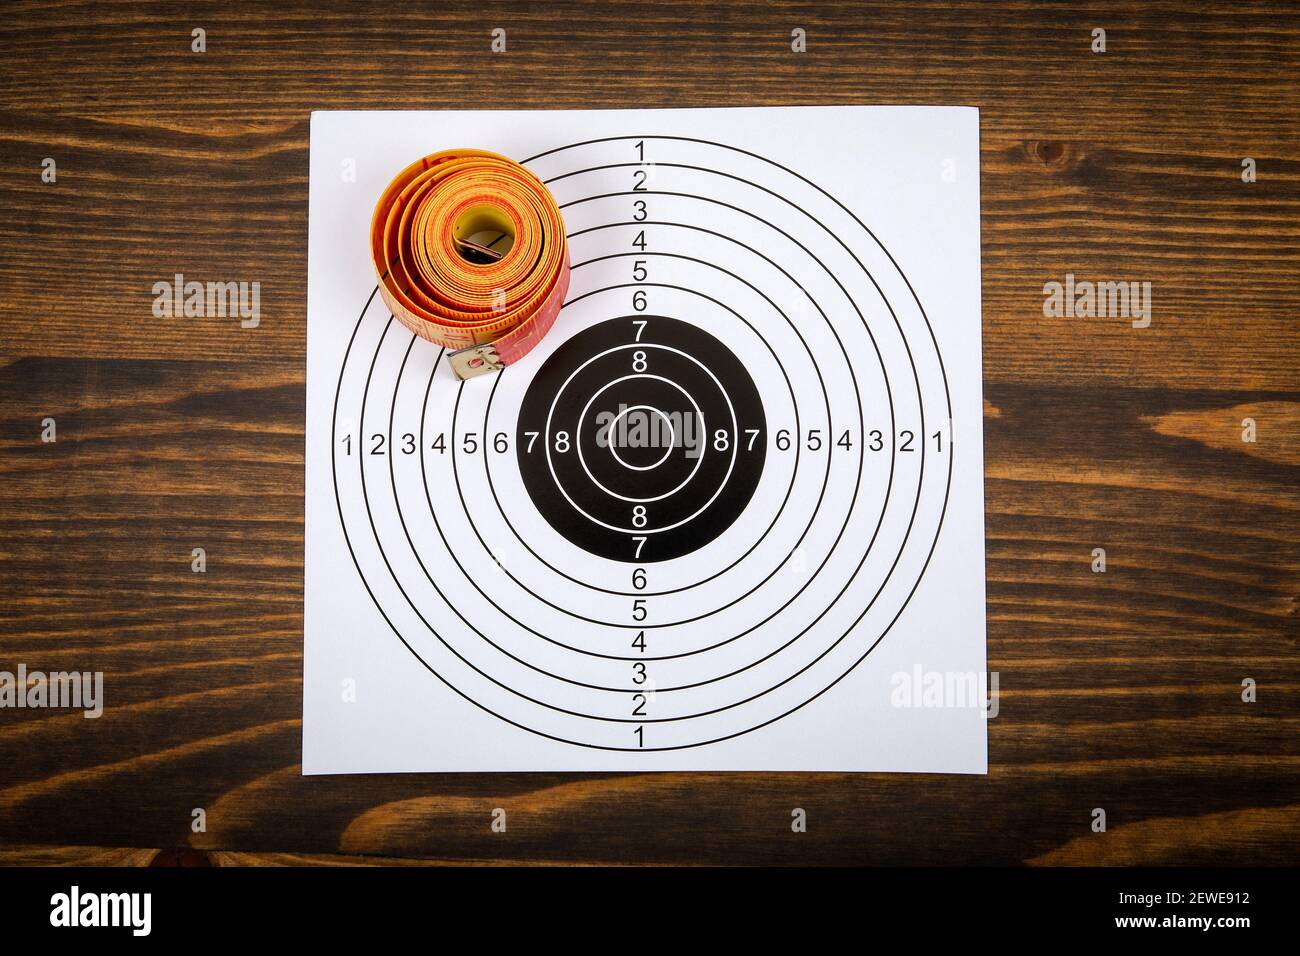 Weight loss and health concept. Tape measure and paper target on a wooden background. Stock Photo